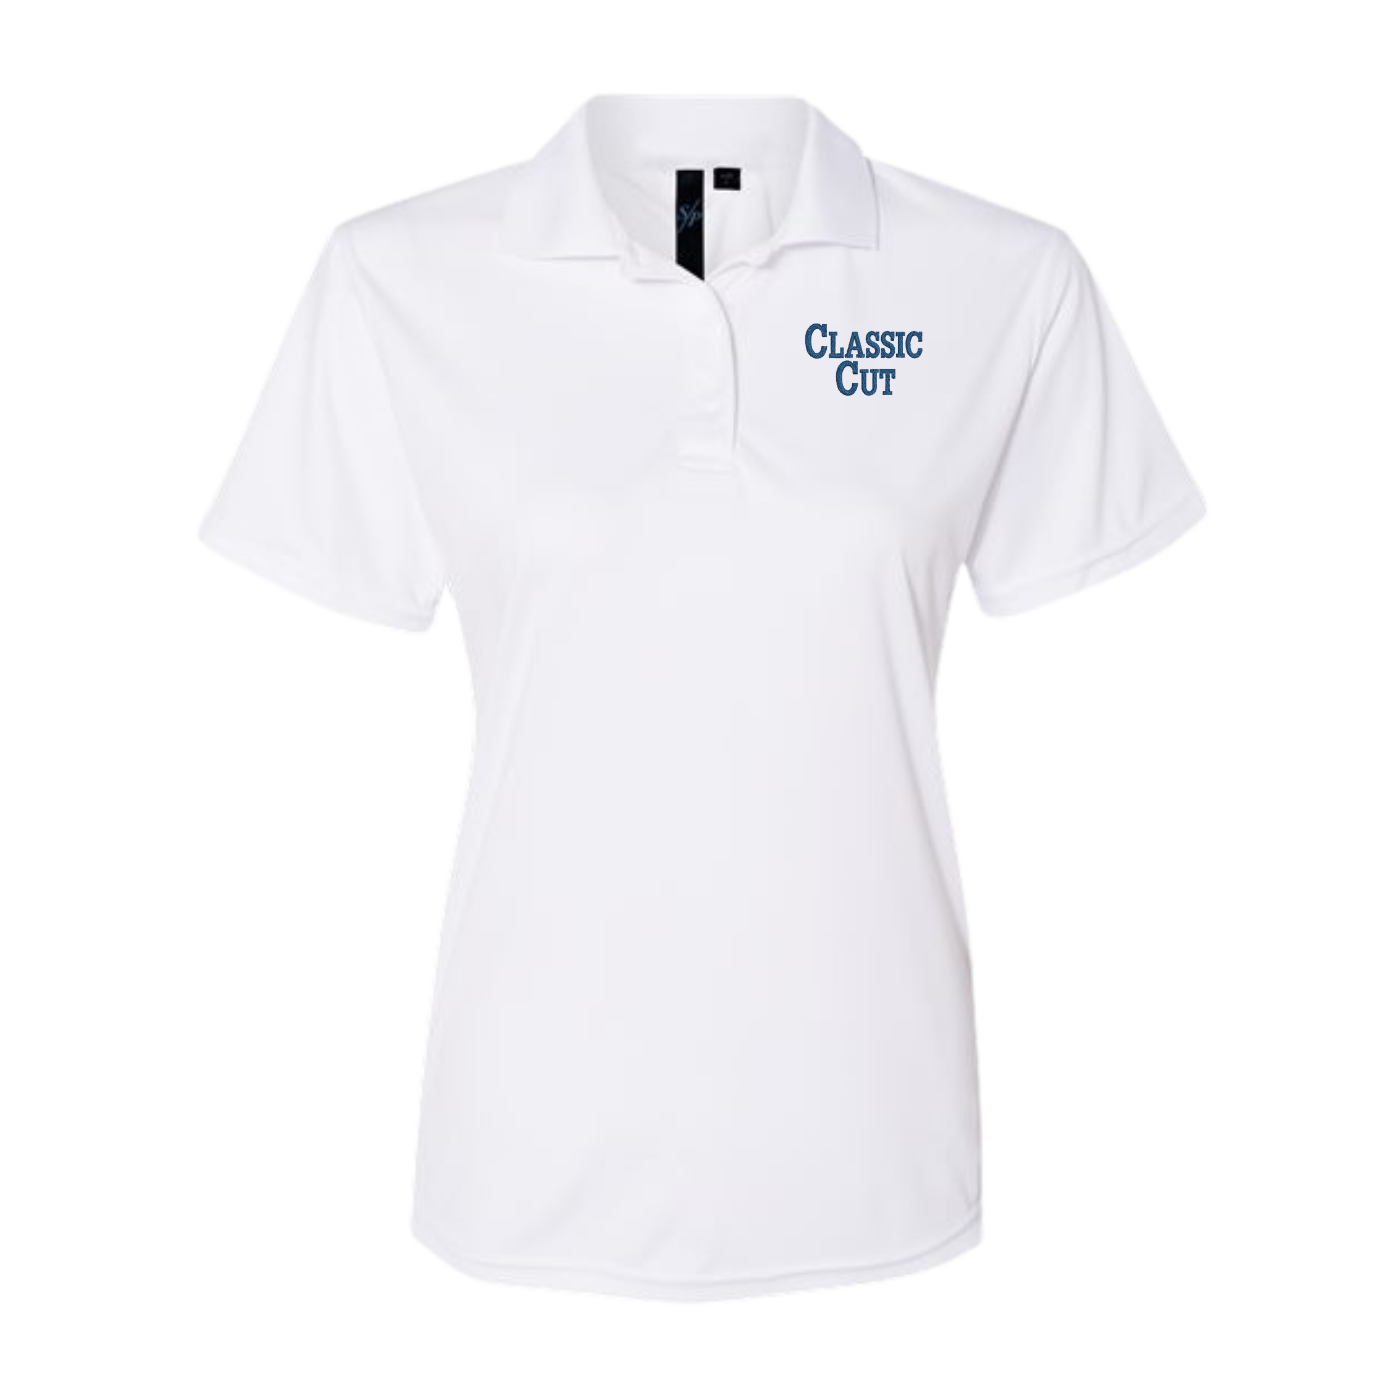 Classic Cut Women's Embroidered Polo Shirt